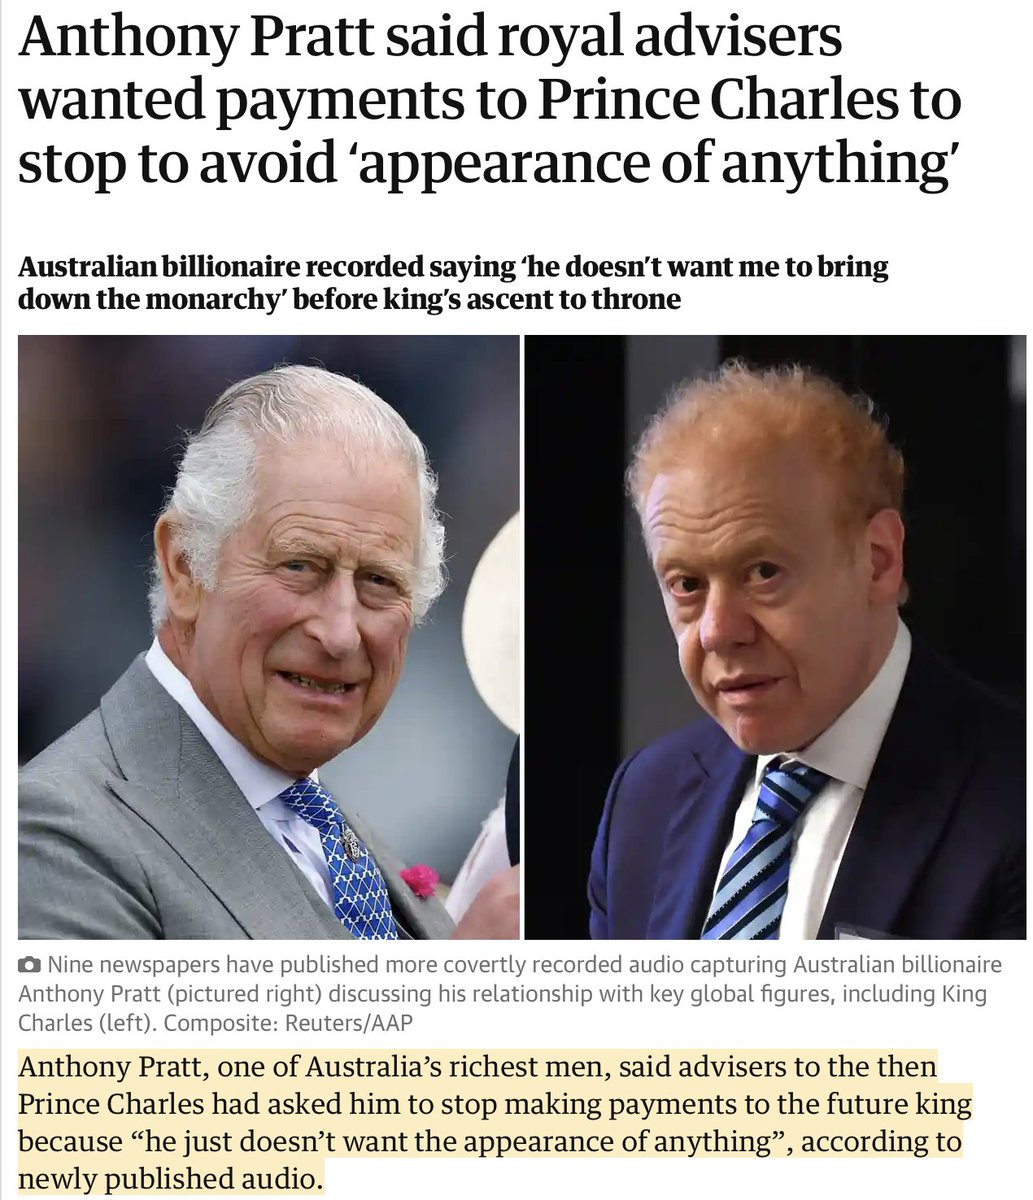 The Australian Billionaire who Trump spilled nuclear secrets to made regular payments to Prince Charles til he was asked to stop just before Charles became King to avoid any impropriety. Hope Jack's DOJ team looks into whether Trump got any payments other than Mar-a-Lago dues.